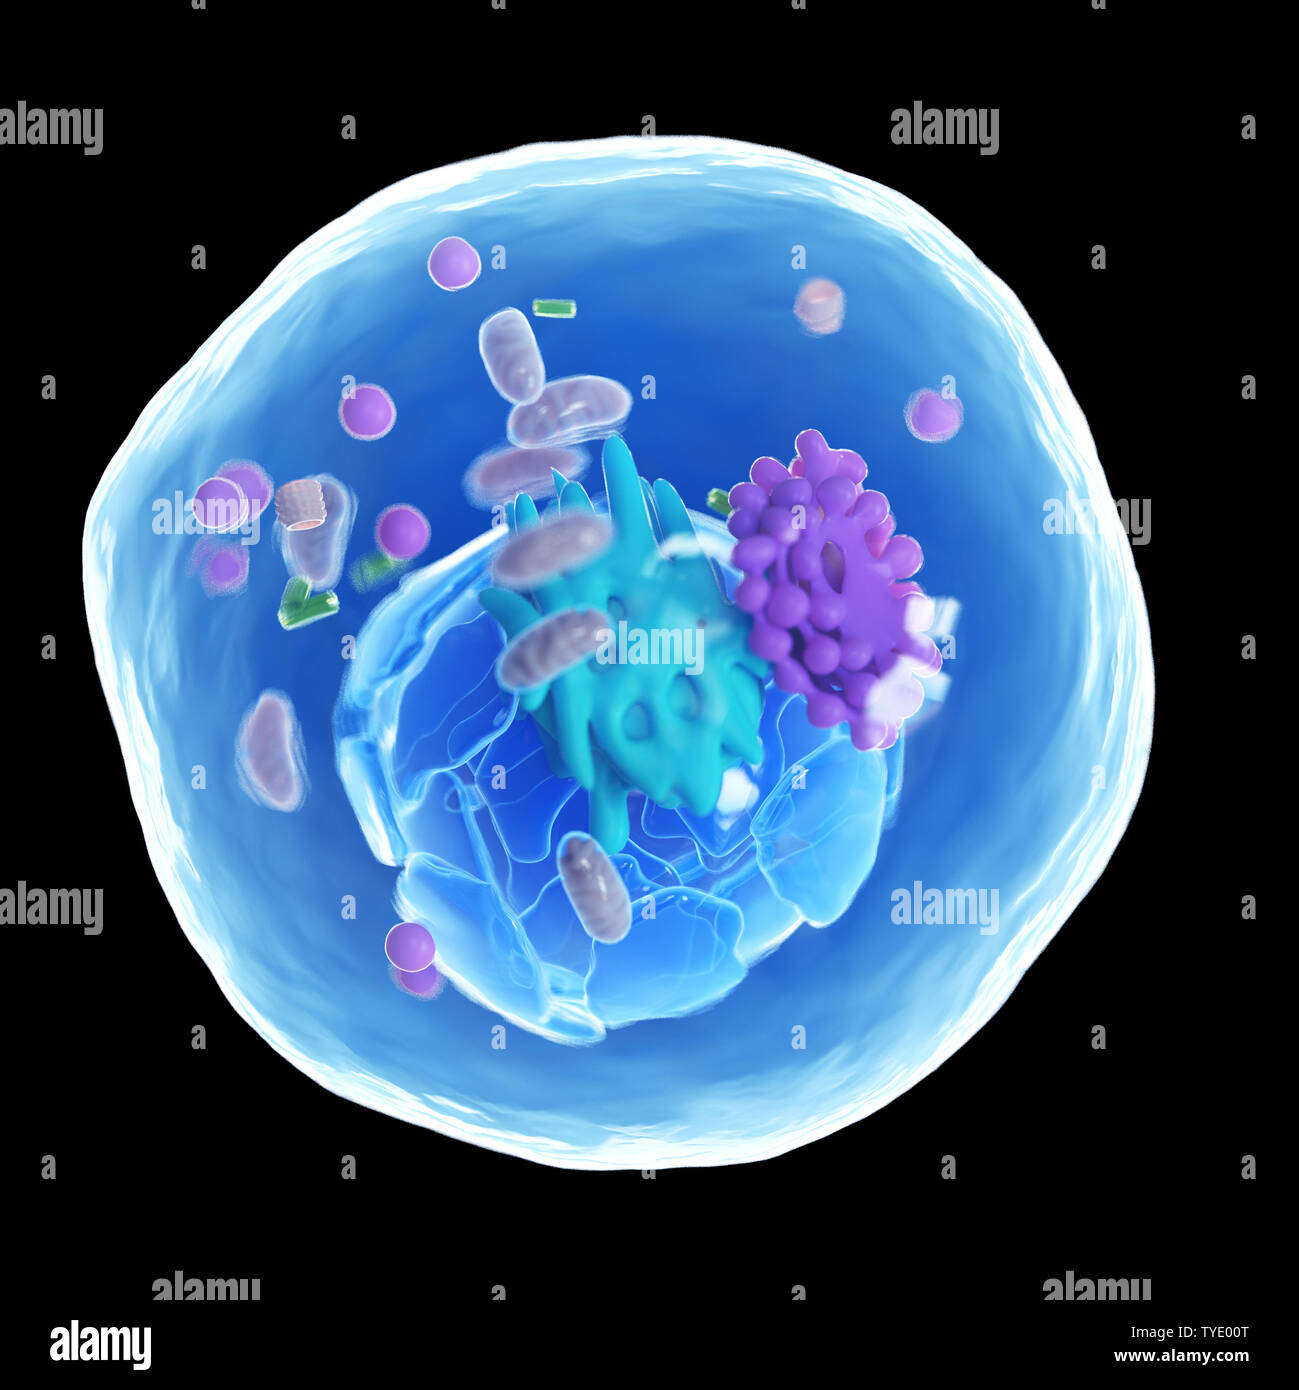 3d illustration of a human cell Stock Photo